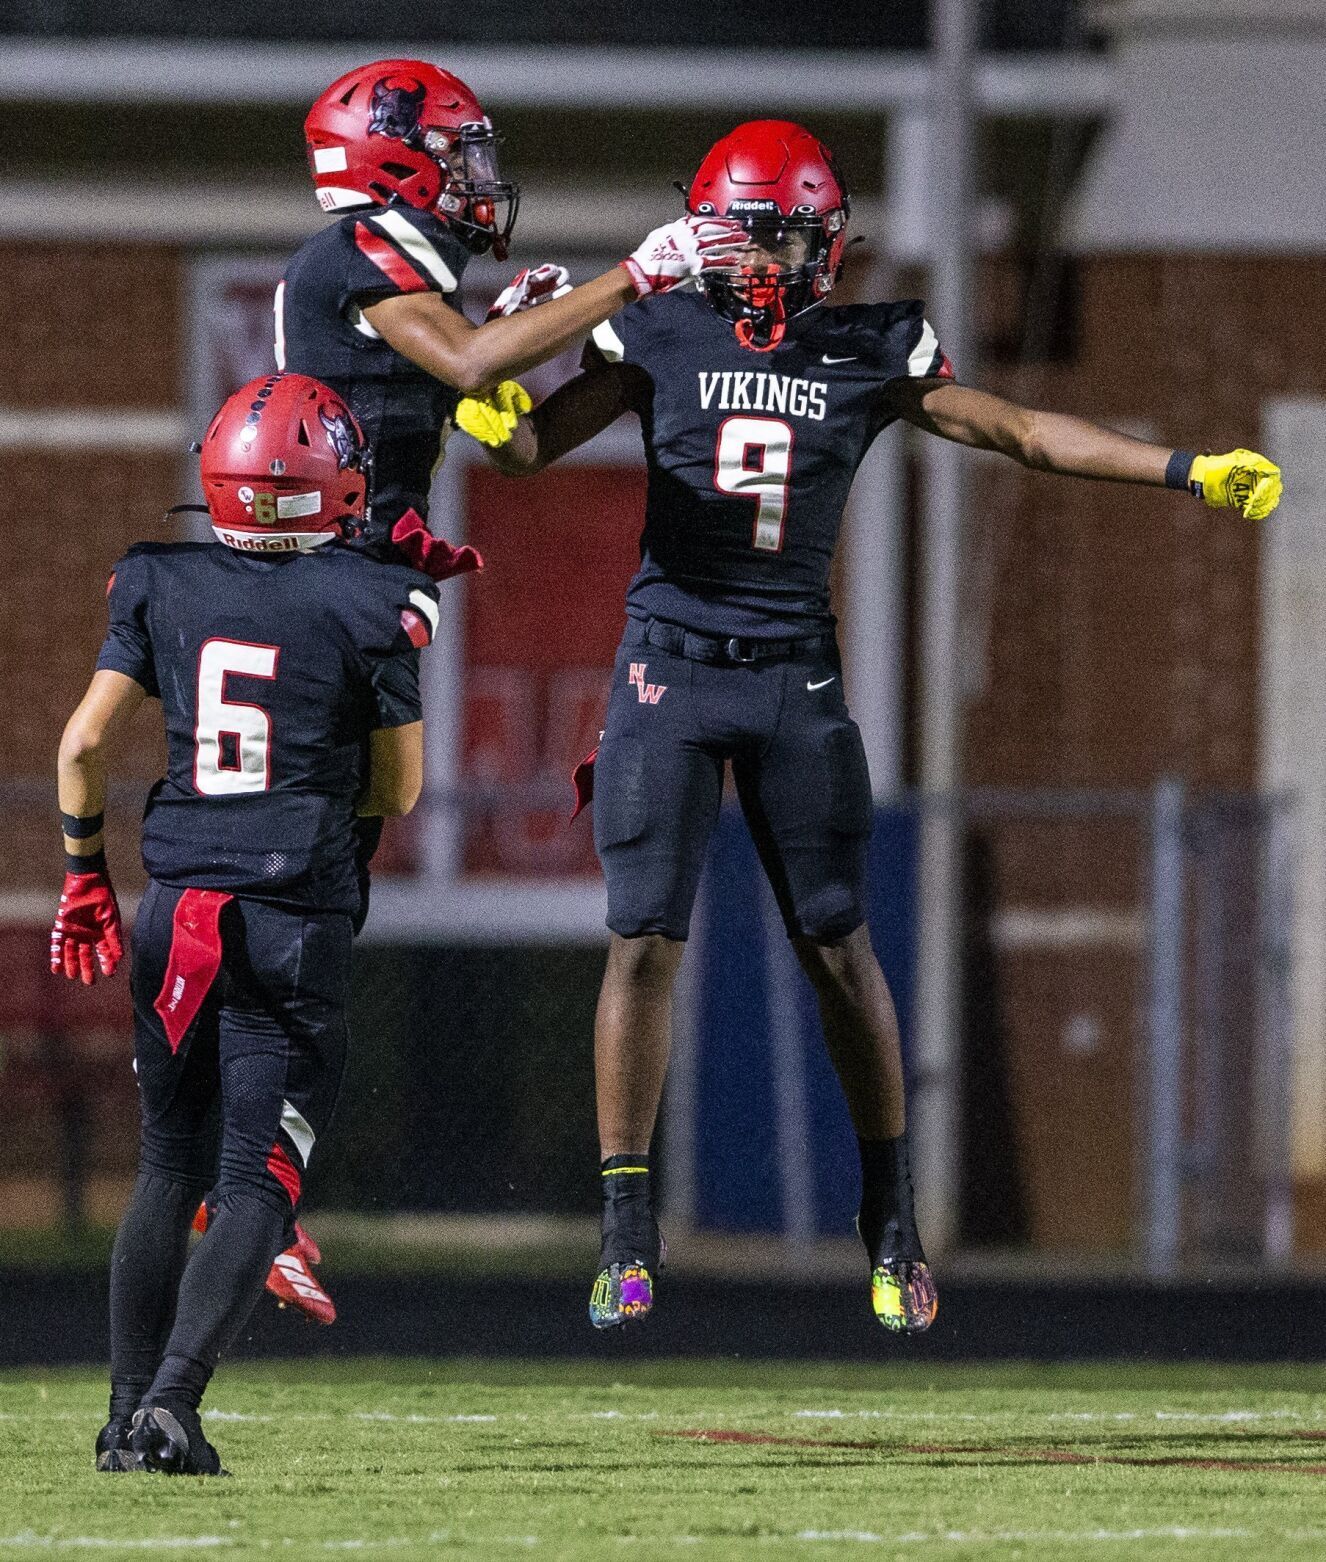 Northwest Guilford Triumphs over Northern Guilford in High School Football Thriller